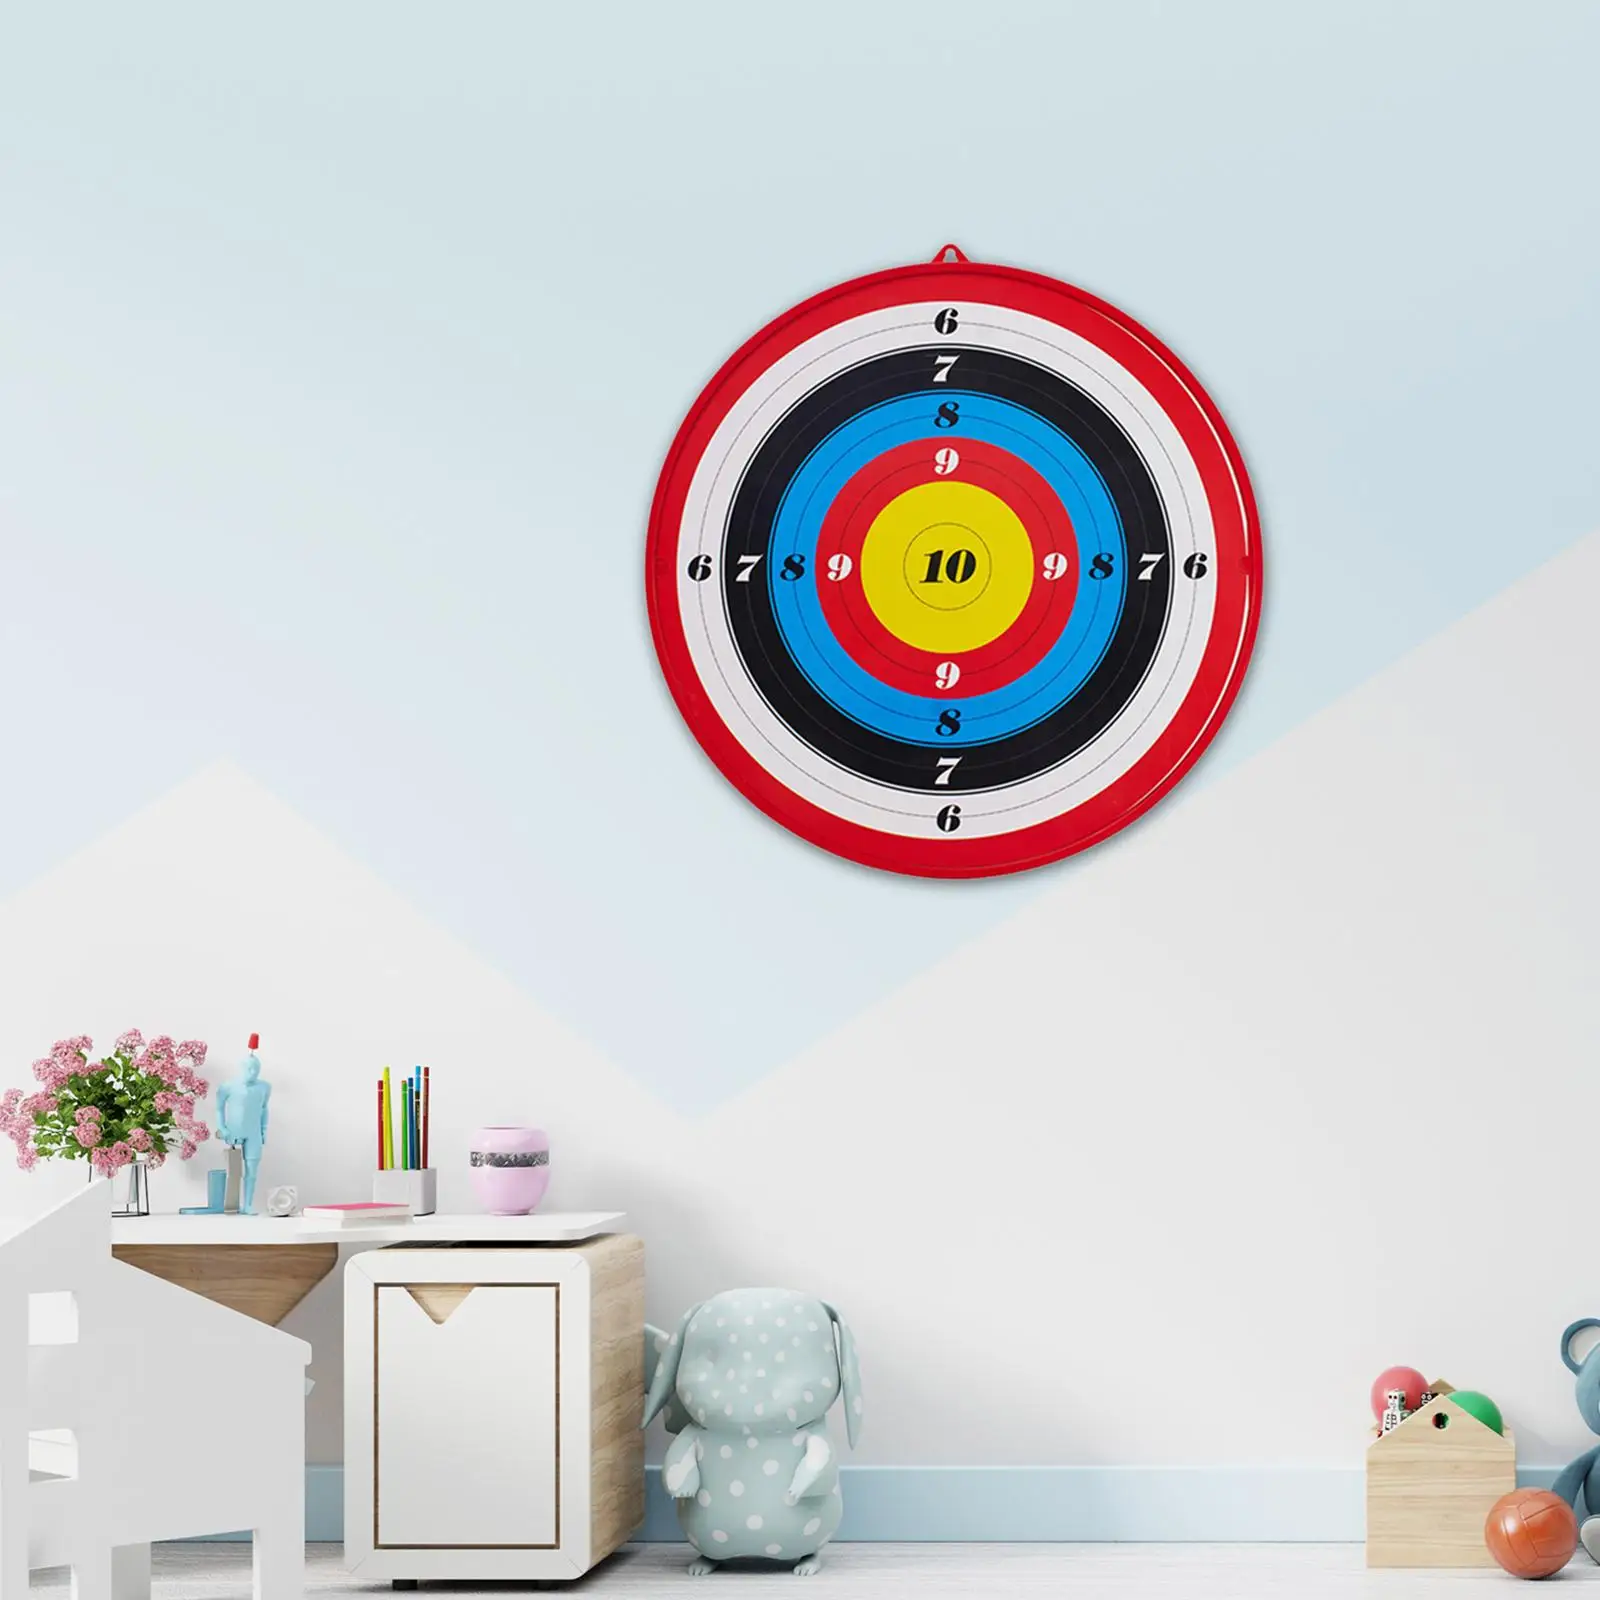 Hanging Target Exercise Training Easy to Use Blasters Practice Toy